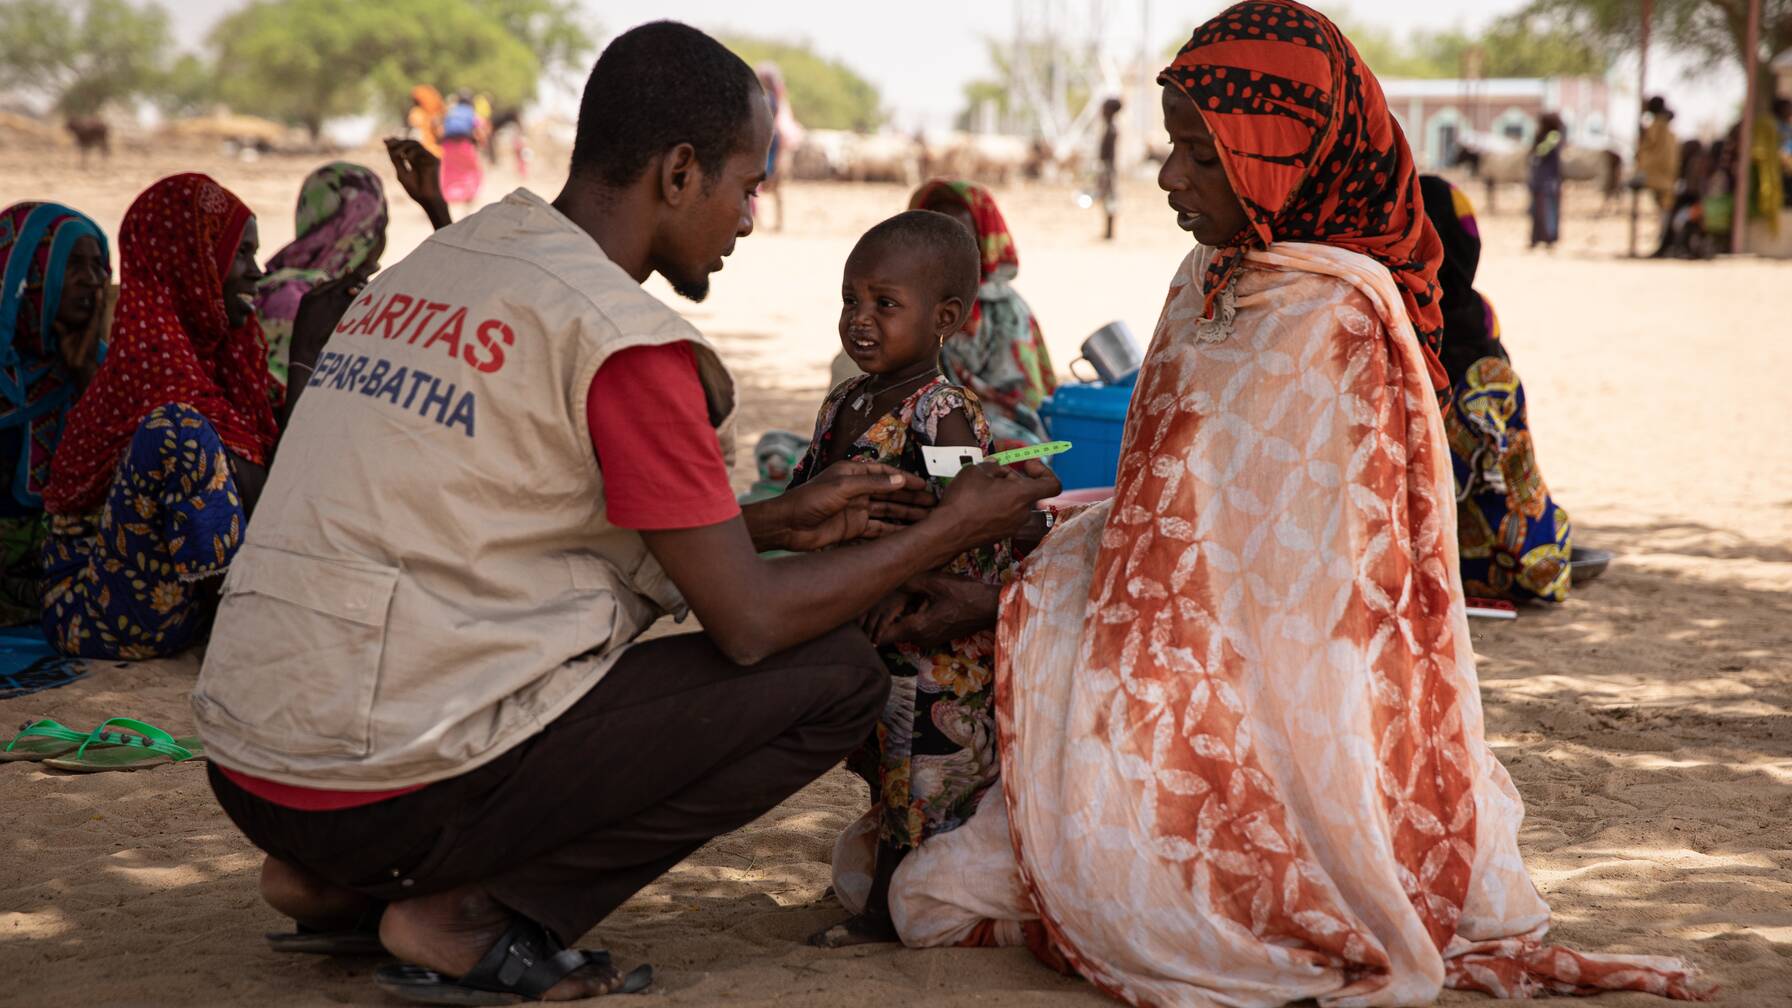 In the region around the village of Ambrahim, Chad, there are many malnourished or undernourished children due to lack of and unbalanced food and water scarcity.